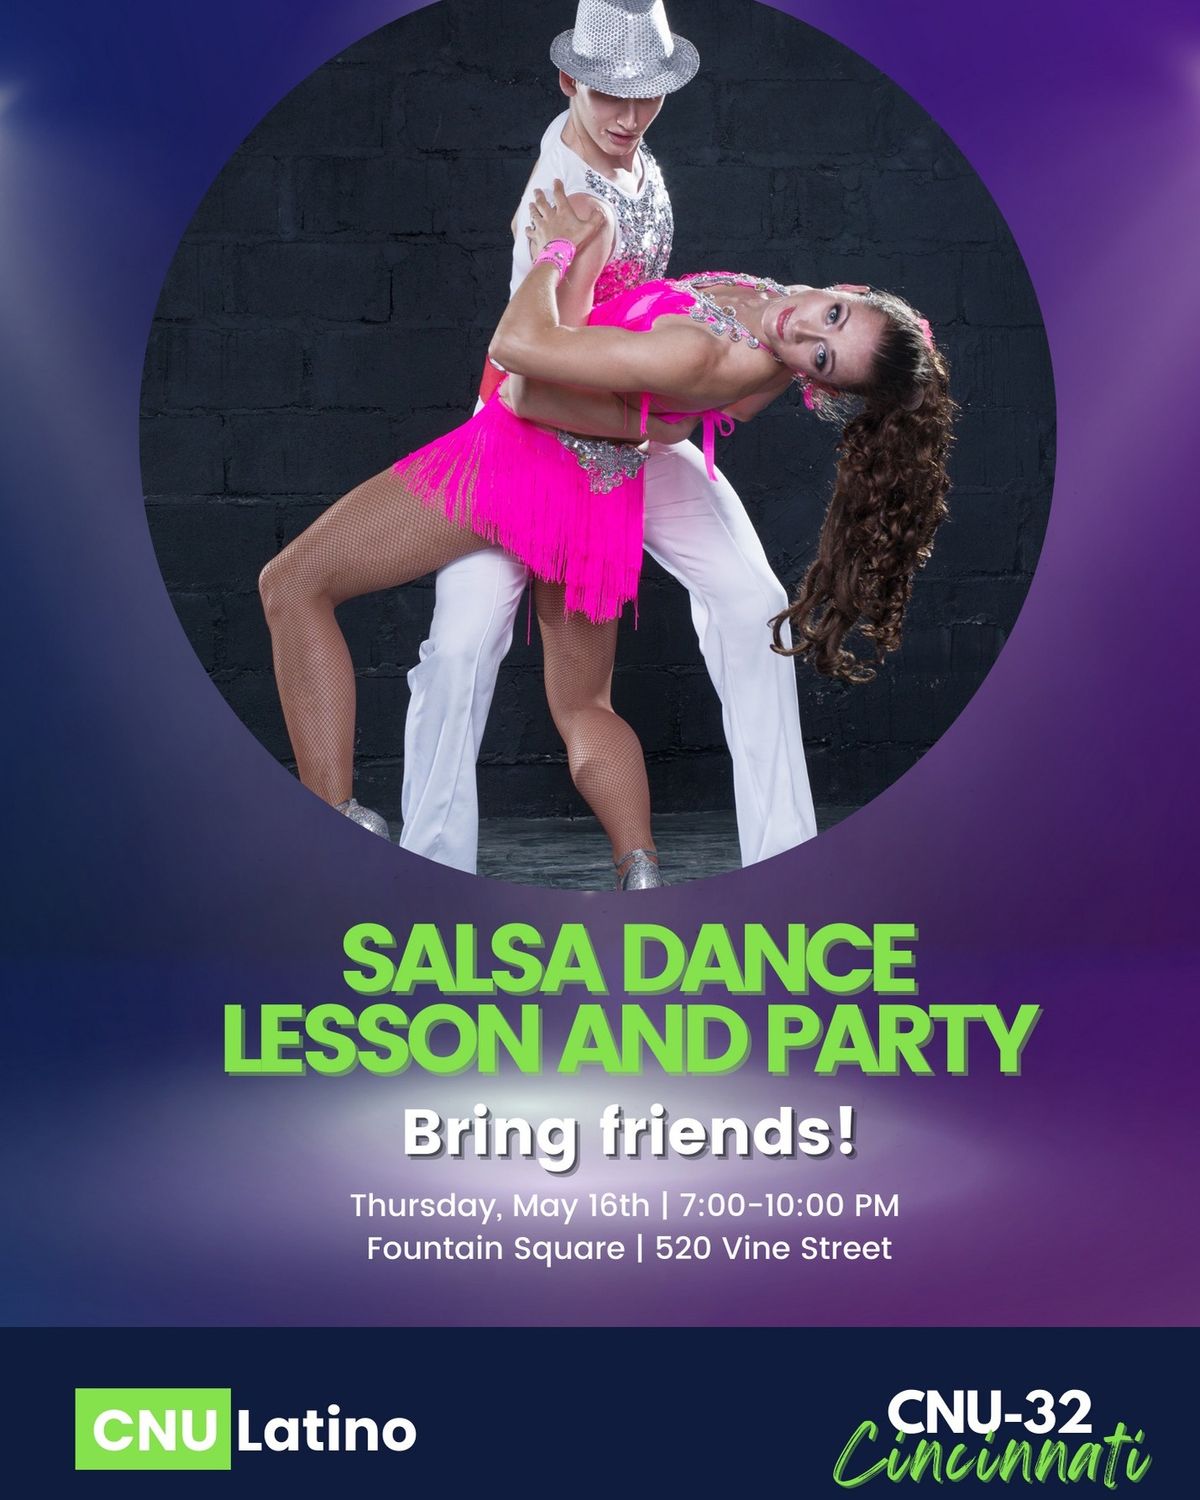 CNU32 Salsa Dance Lesson and Party